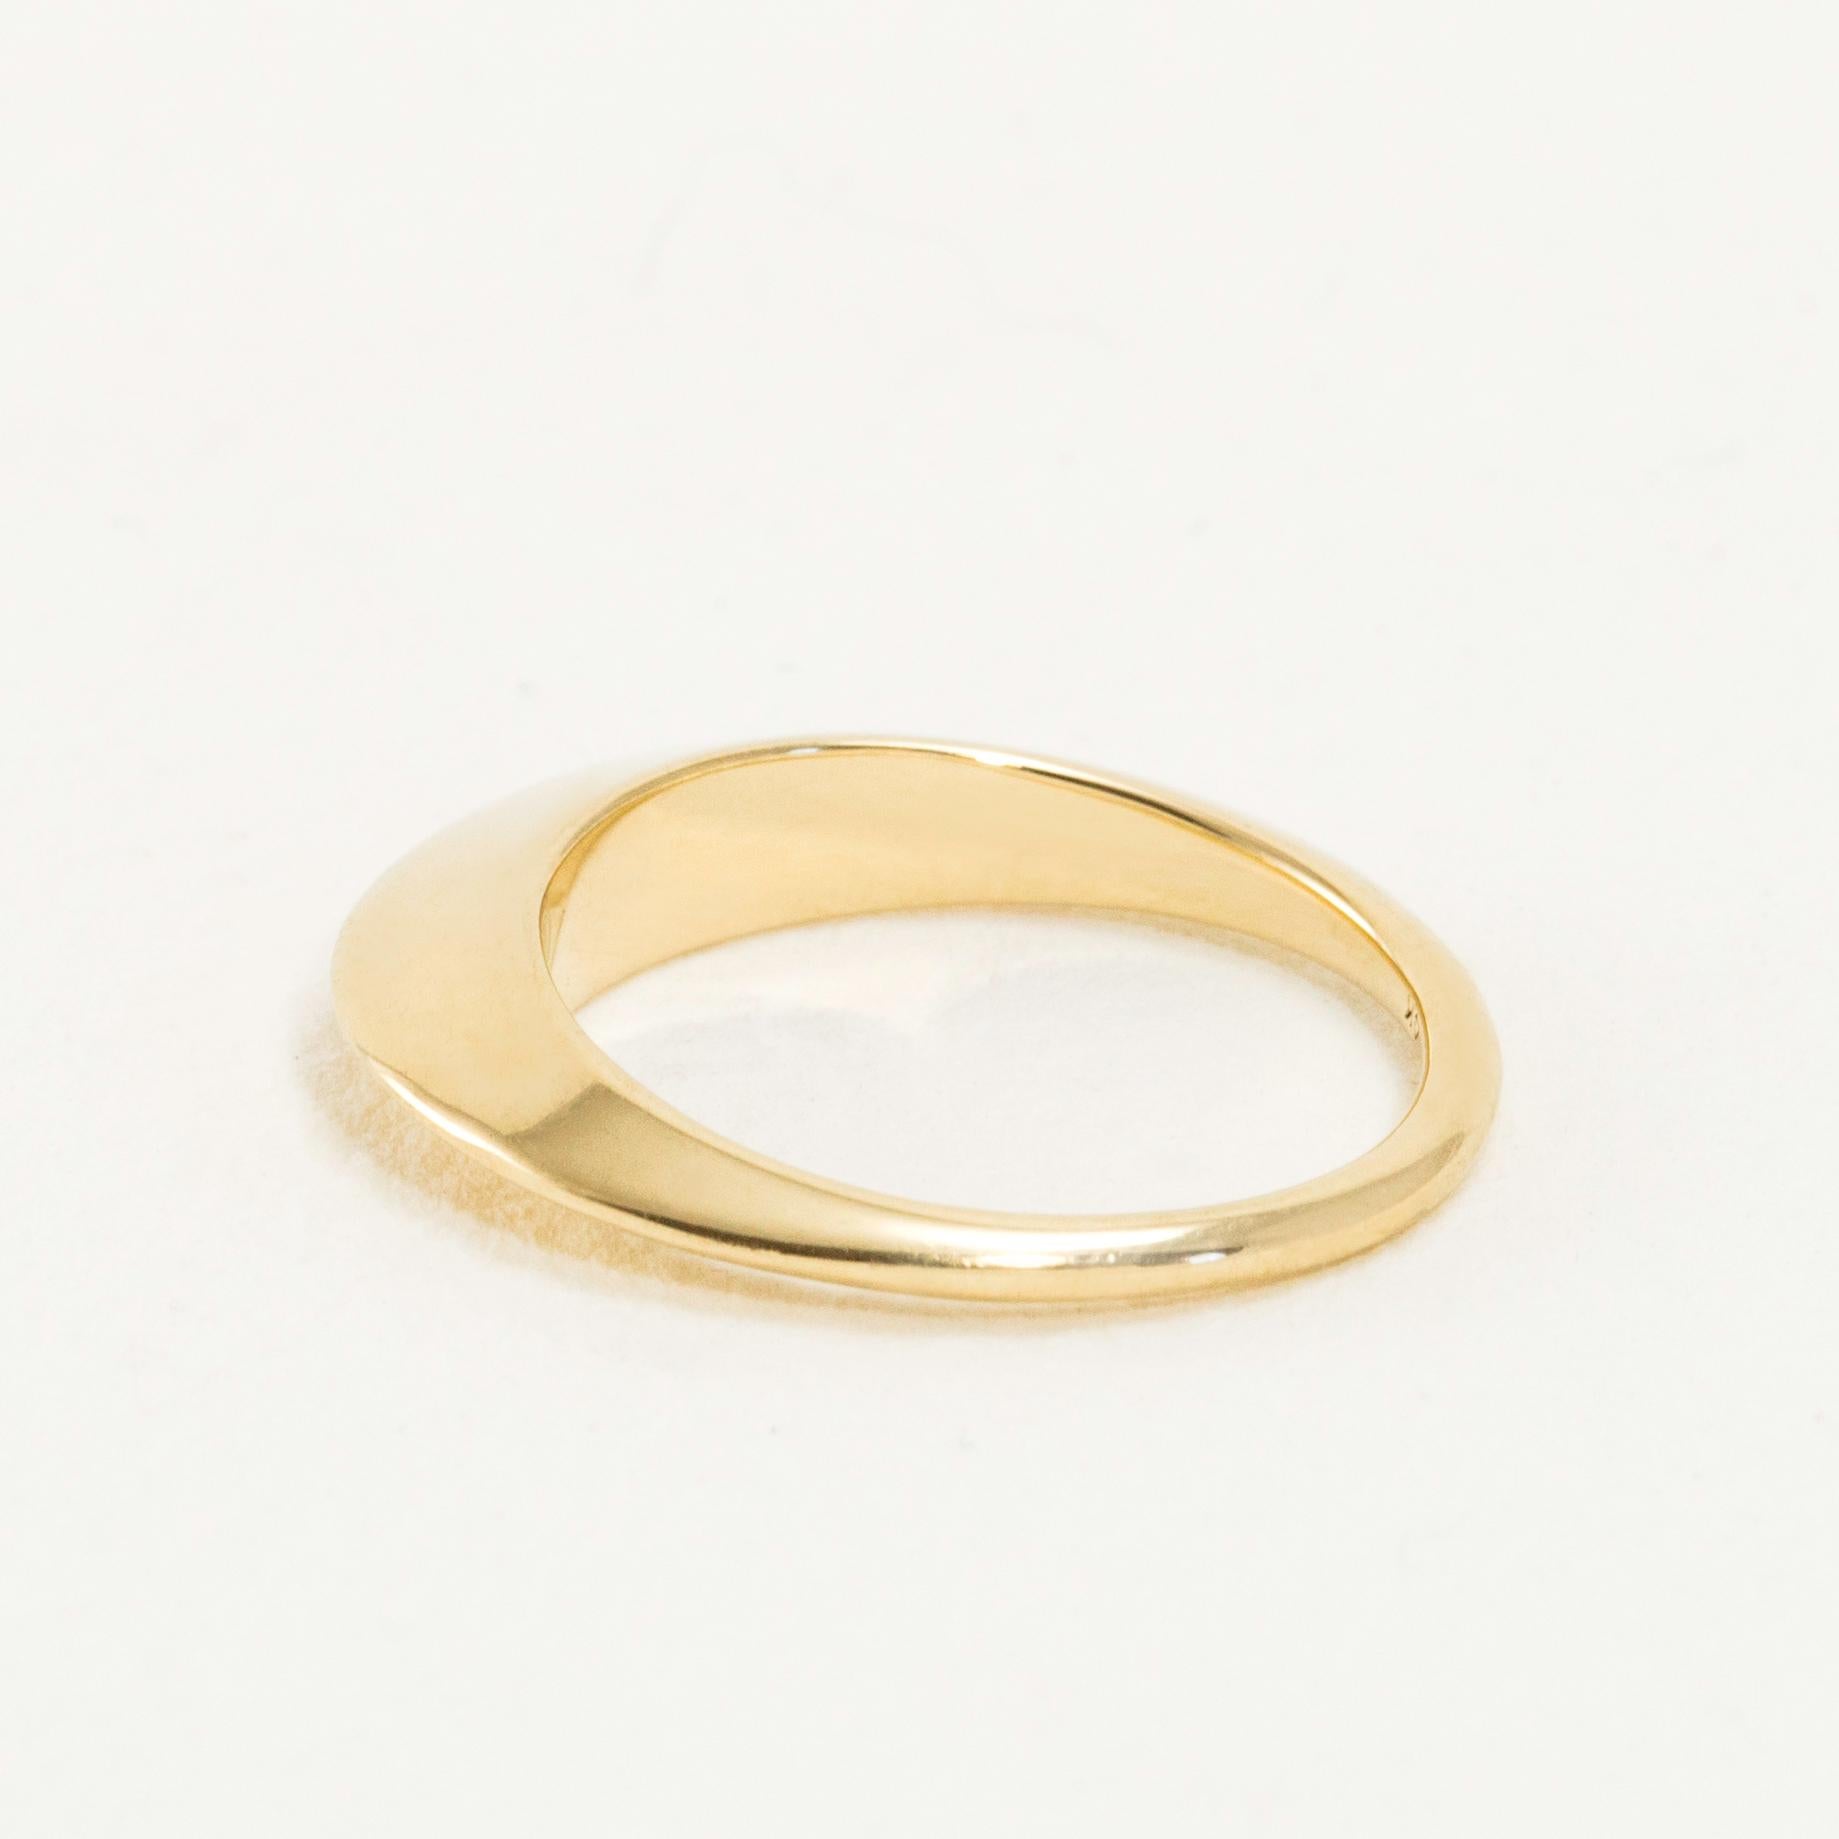 The Revolution Triangle ring gracefully cycles from a lower circular band to a triangular  top and back again. As the classic rounded base evolves into a strikingly minimalist edge, this piece  reminds us to enjoy life’s transitional interludes and